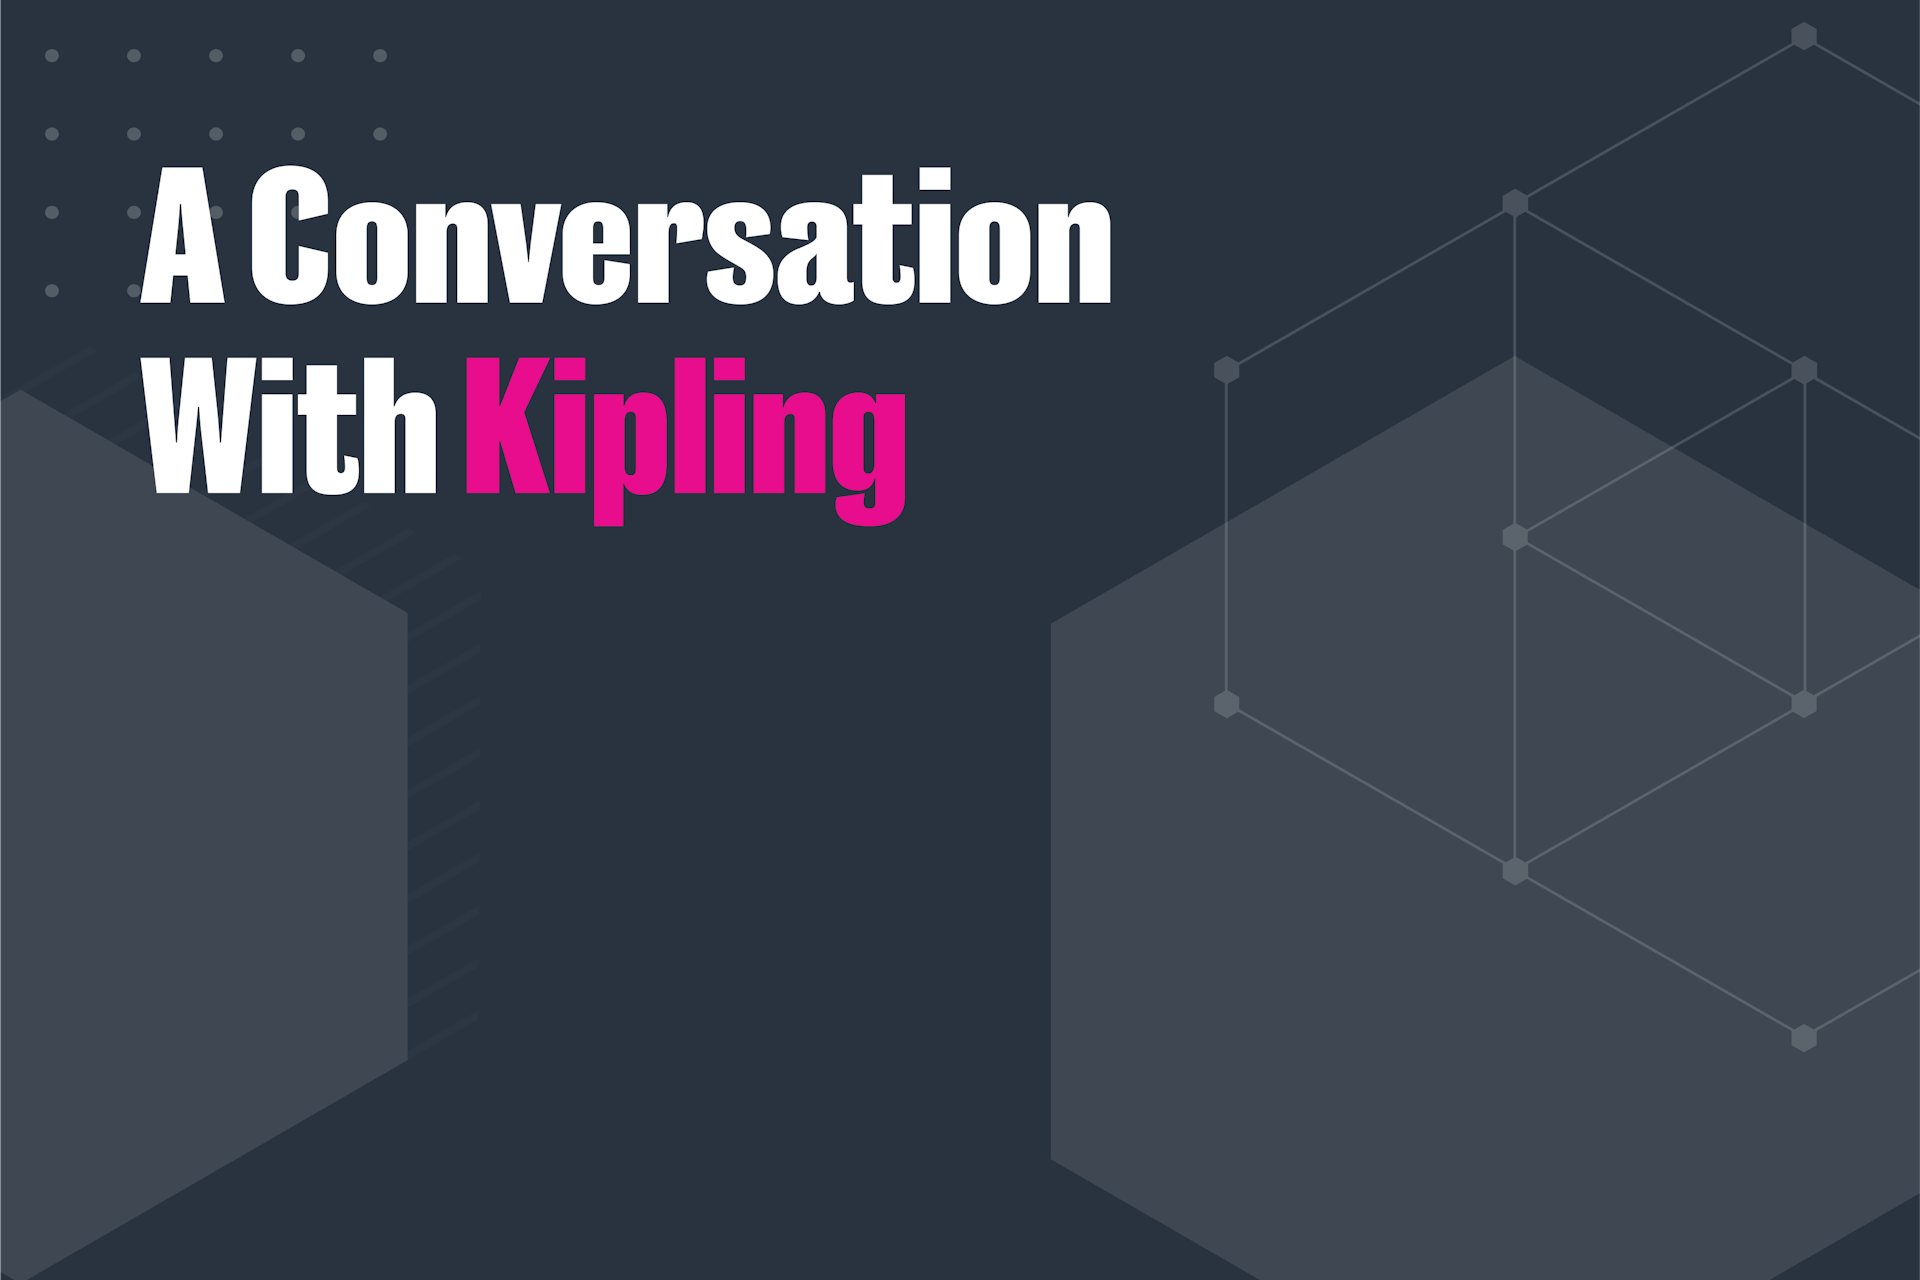 A conversation with Kipling